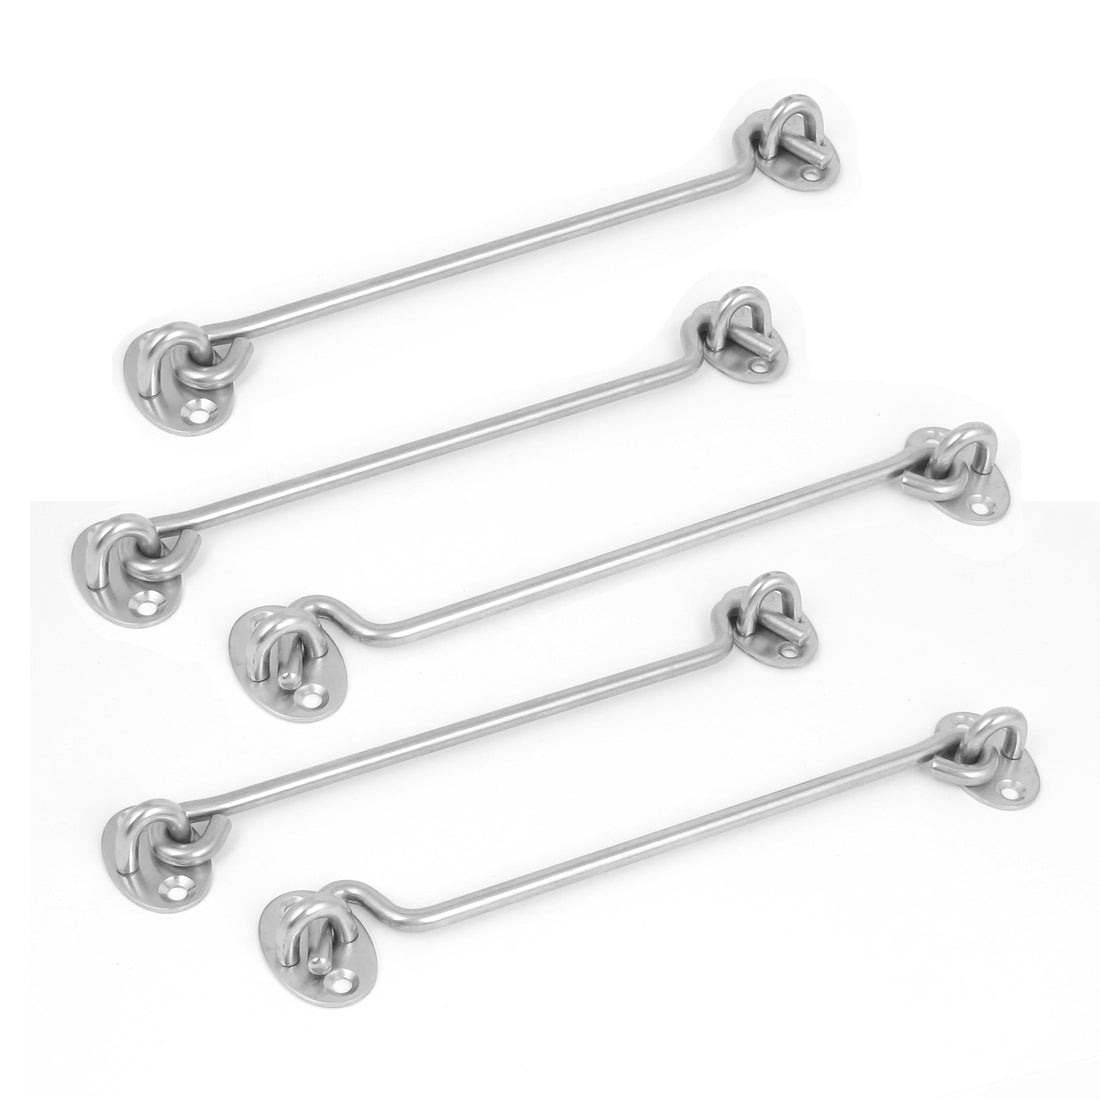 uxcell Uxcell 5pcs 8" 200mm Stainless Steel Cabin Hook Eye Catch Window Shed Gate Door Latch